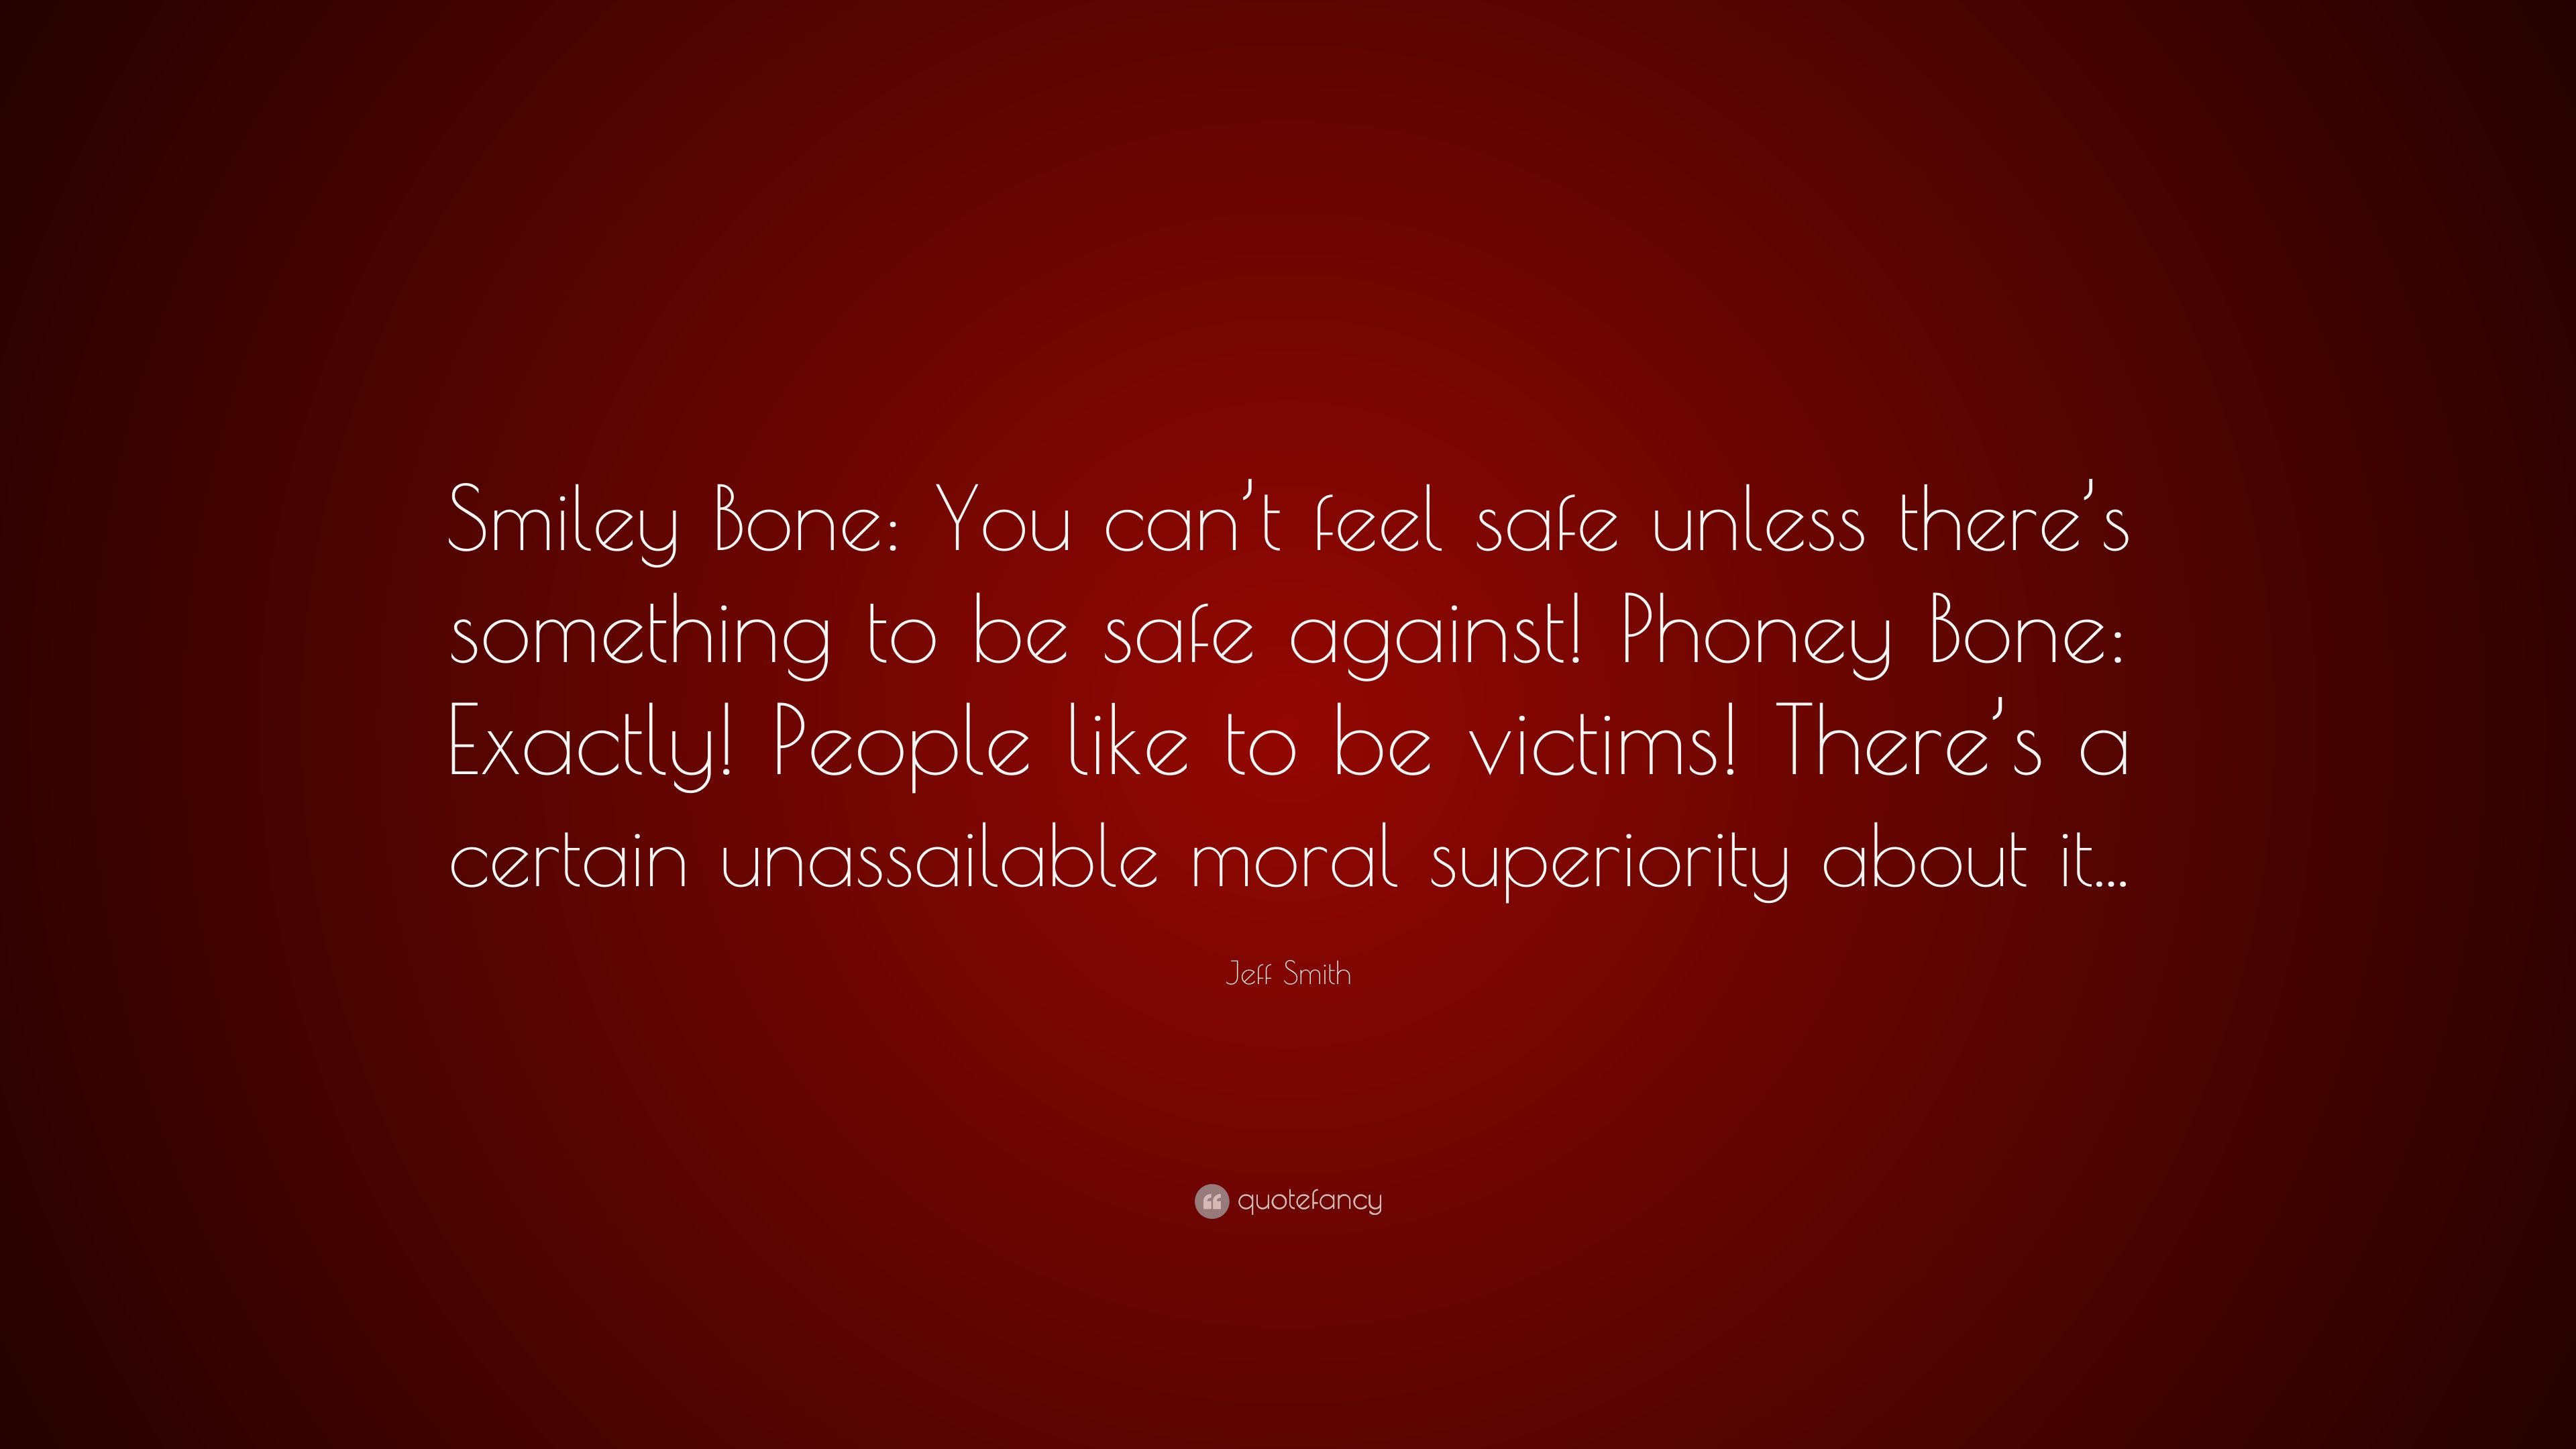 Jeff Smith Quote: “Smiley Bone: You can't feel safe unless there's